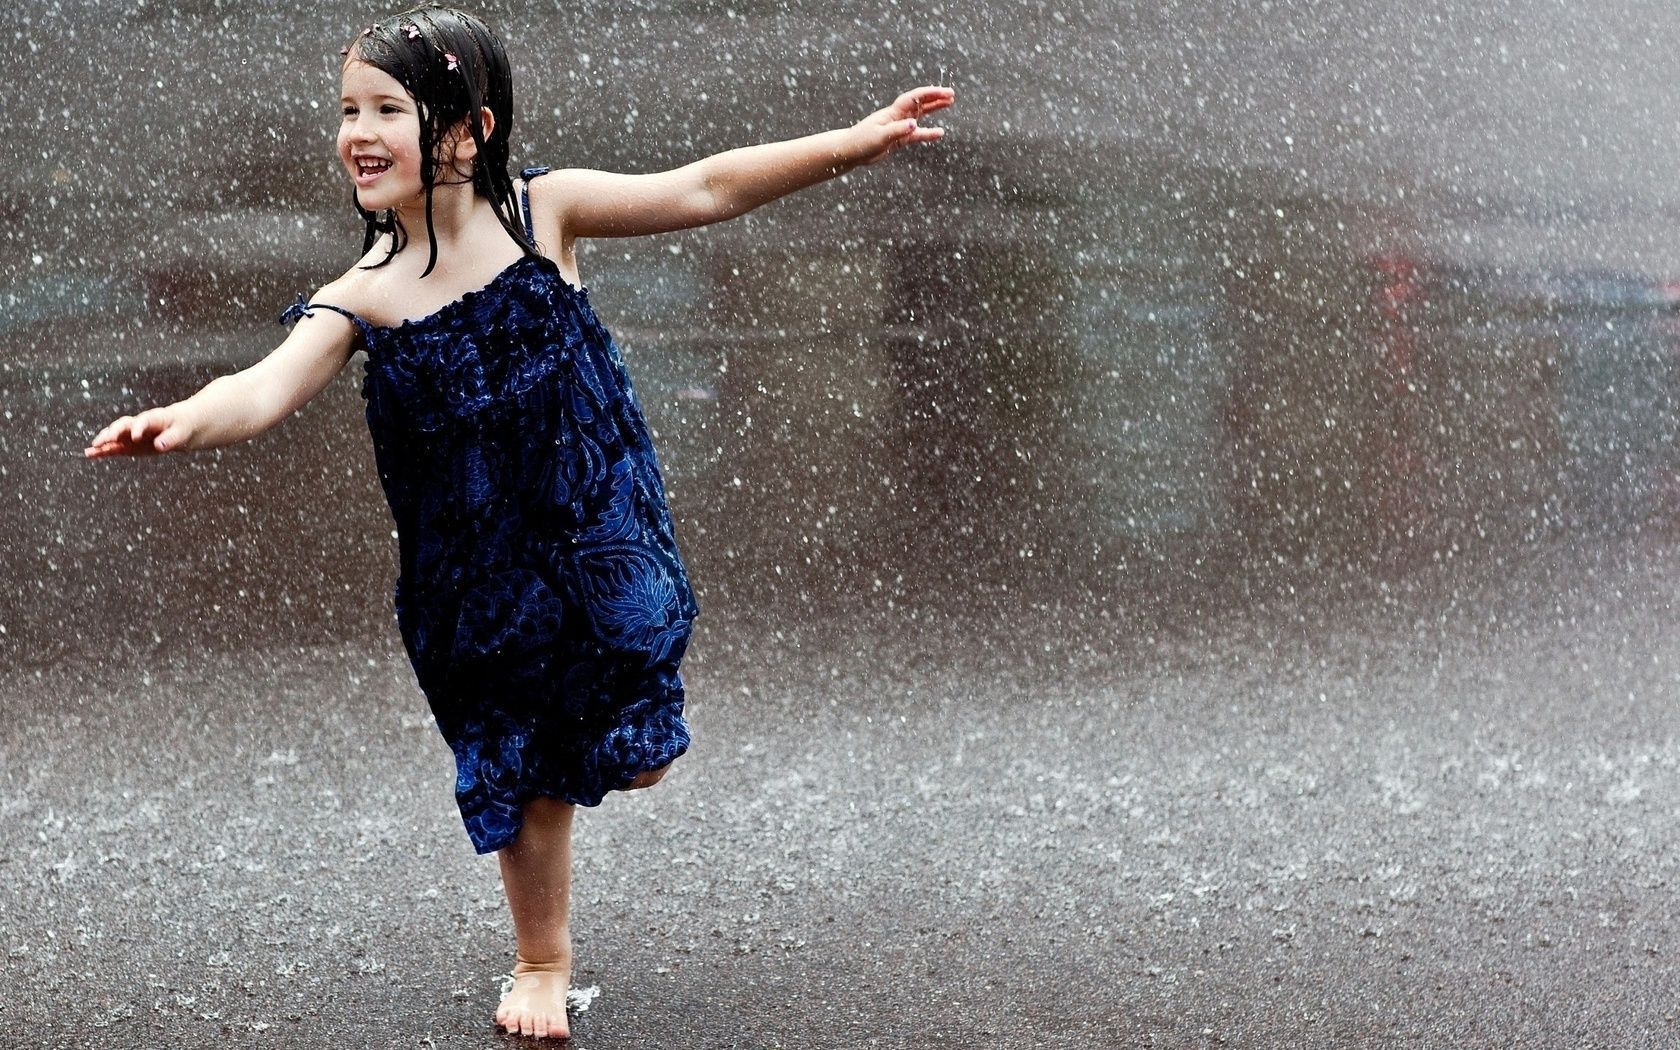 Download Child Of The Rain Photo Mood Wallpaper | Full HD Wallpapers